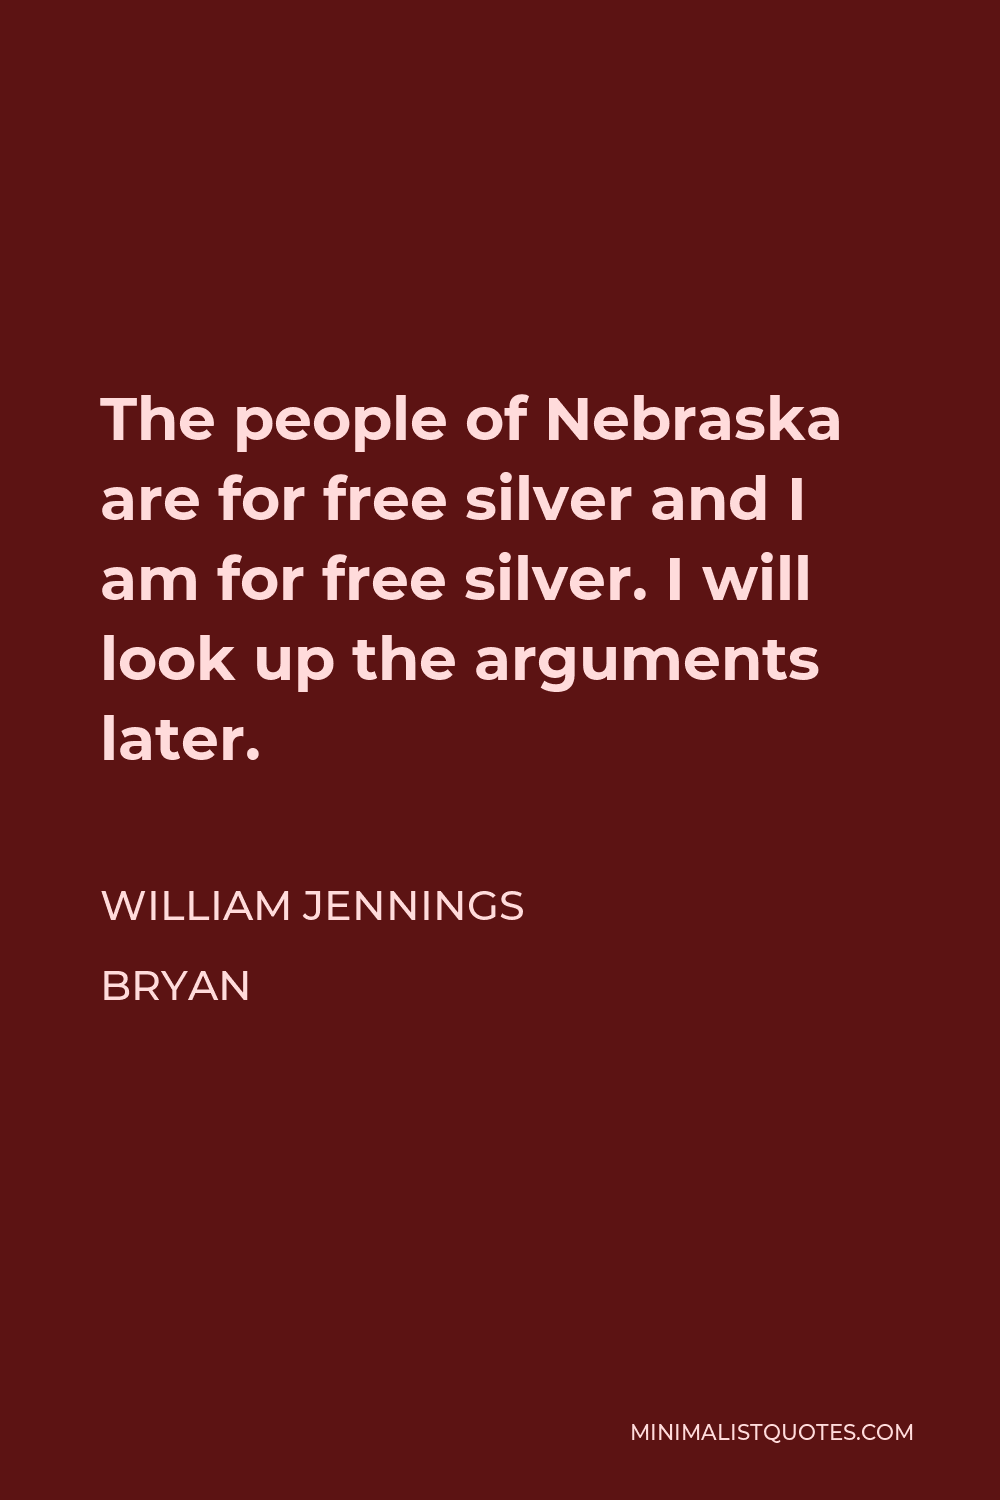 William Jennings Bryan Quote - The people of Nebraska are for free silver and I am for free silver. I will look up the arguments later.